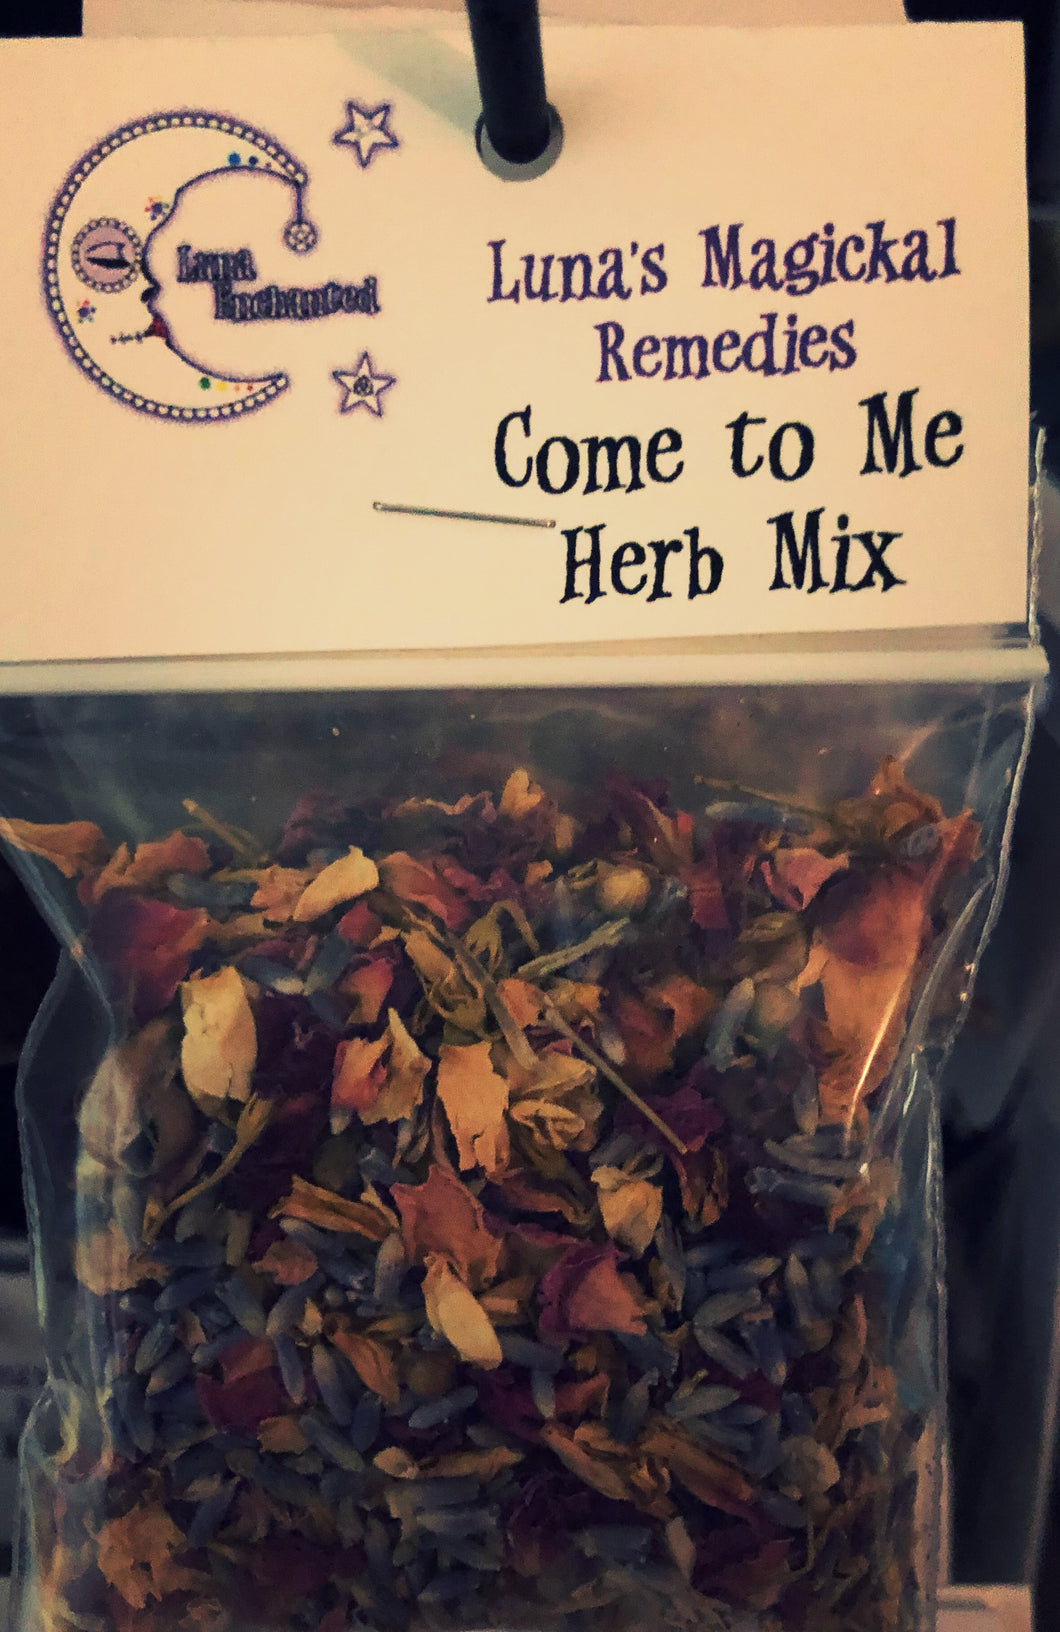 Come to Me Herb Mix